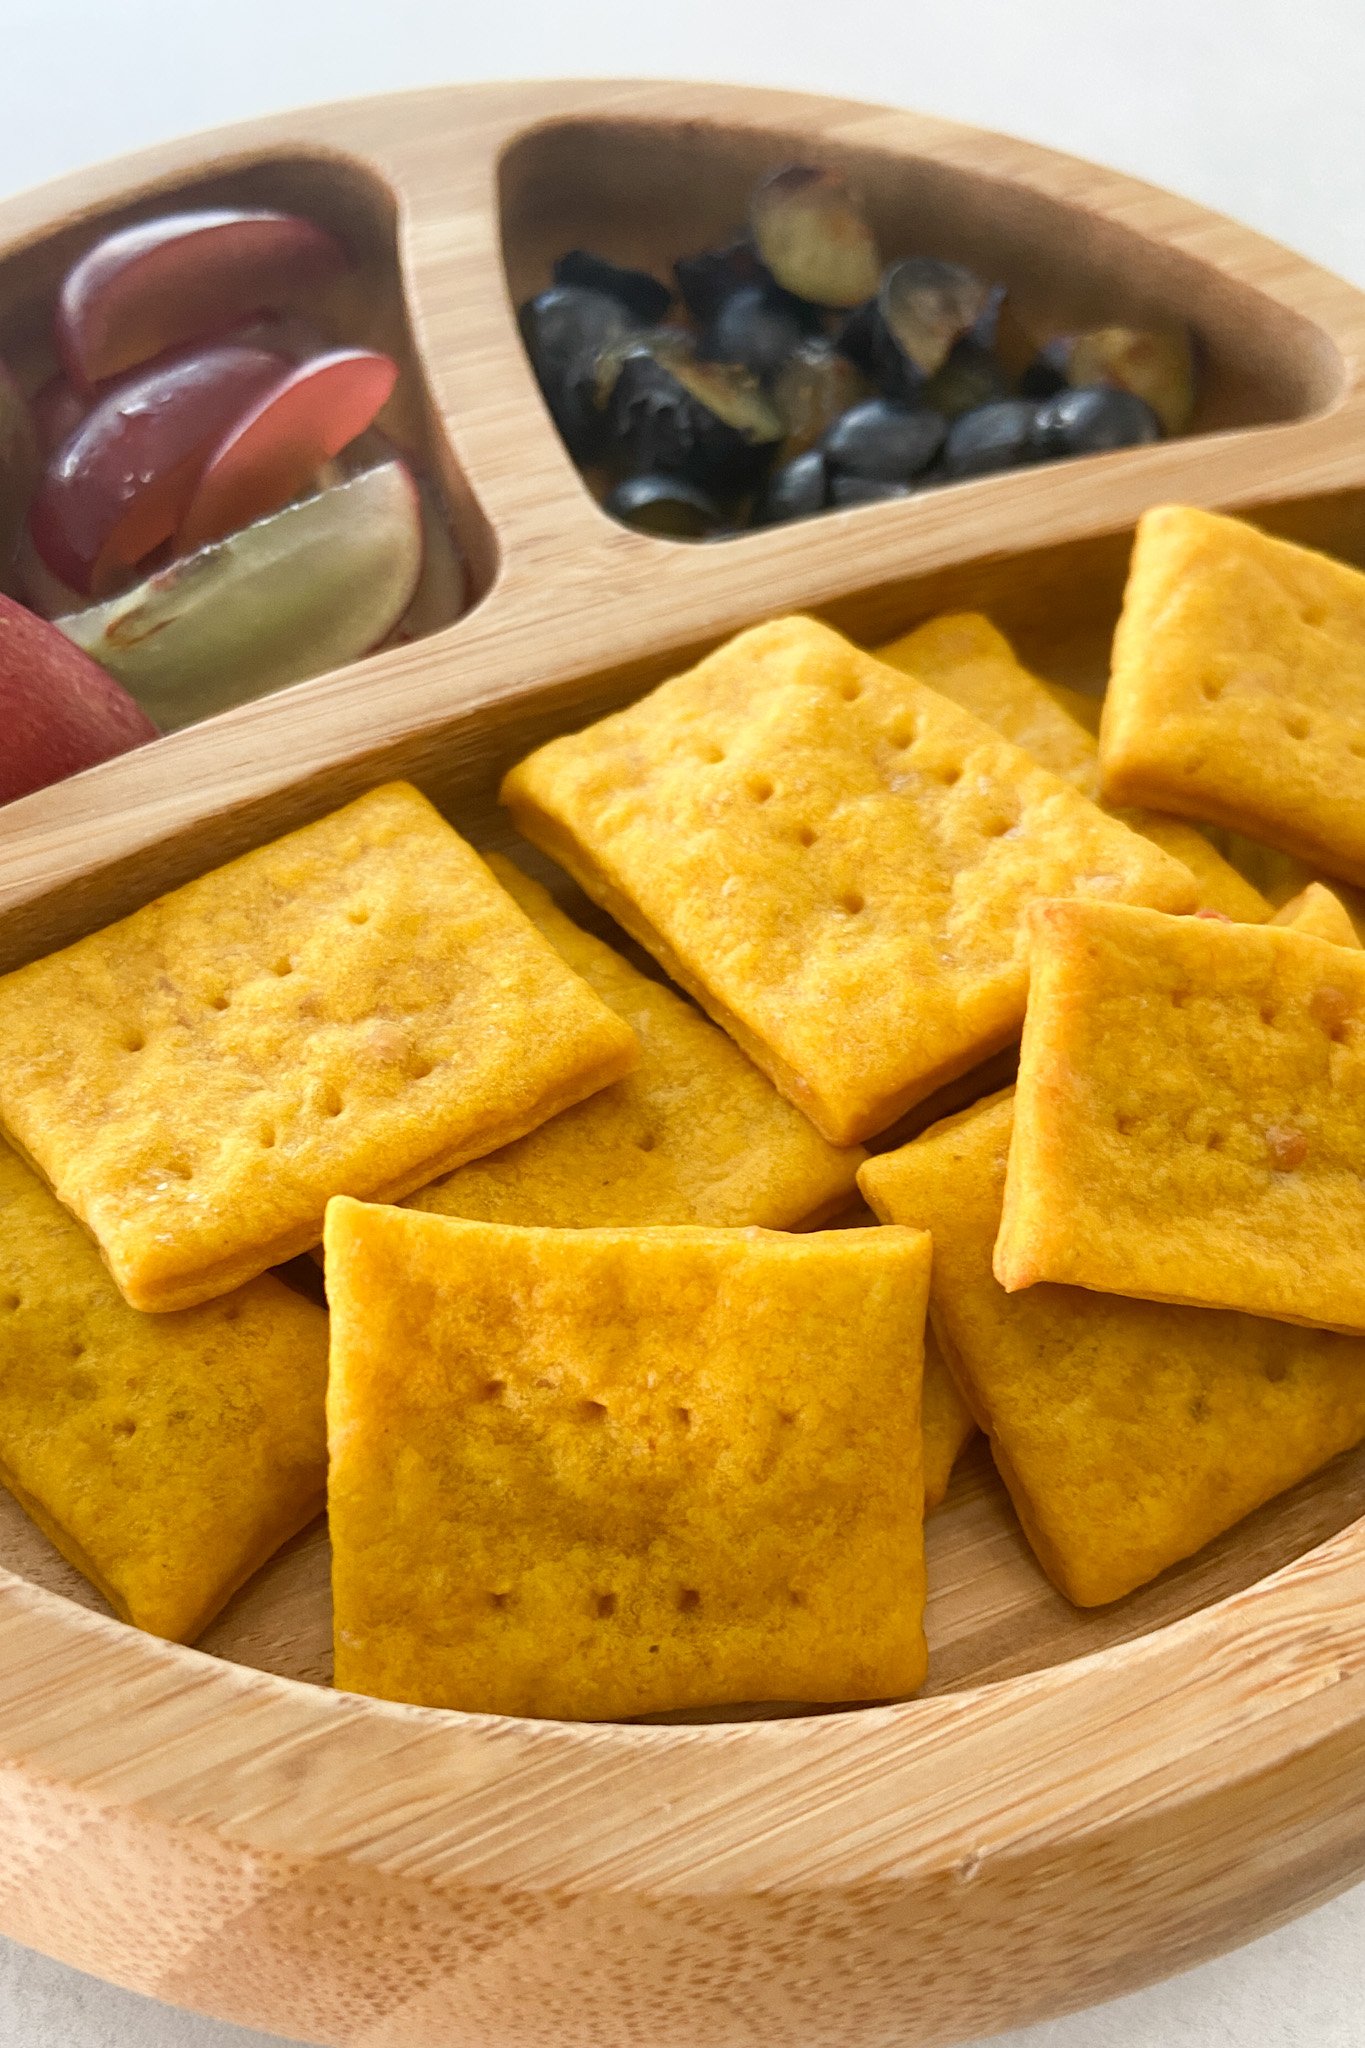 Pumpkin crackers served with fruits